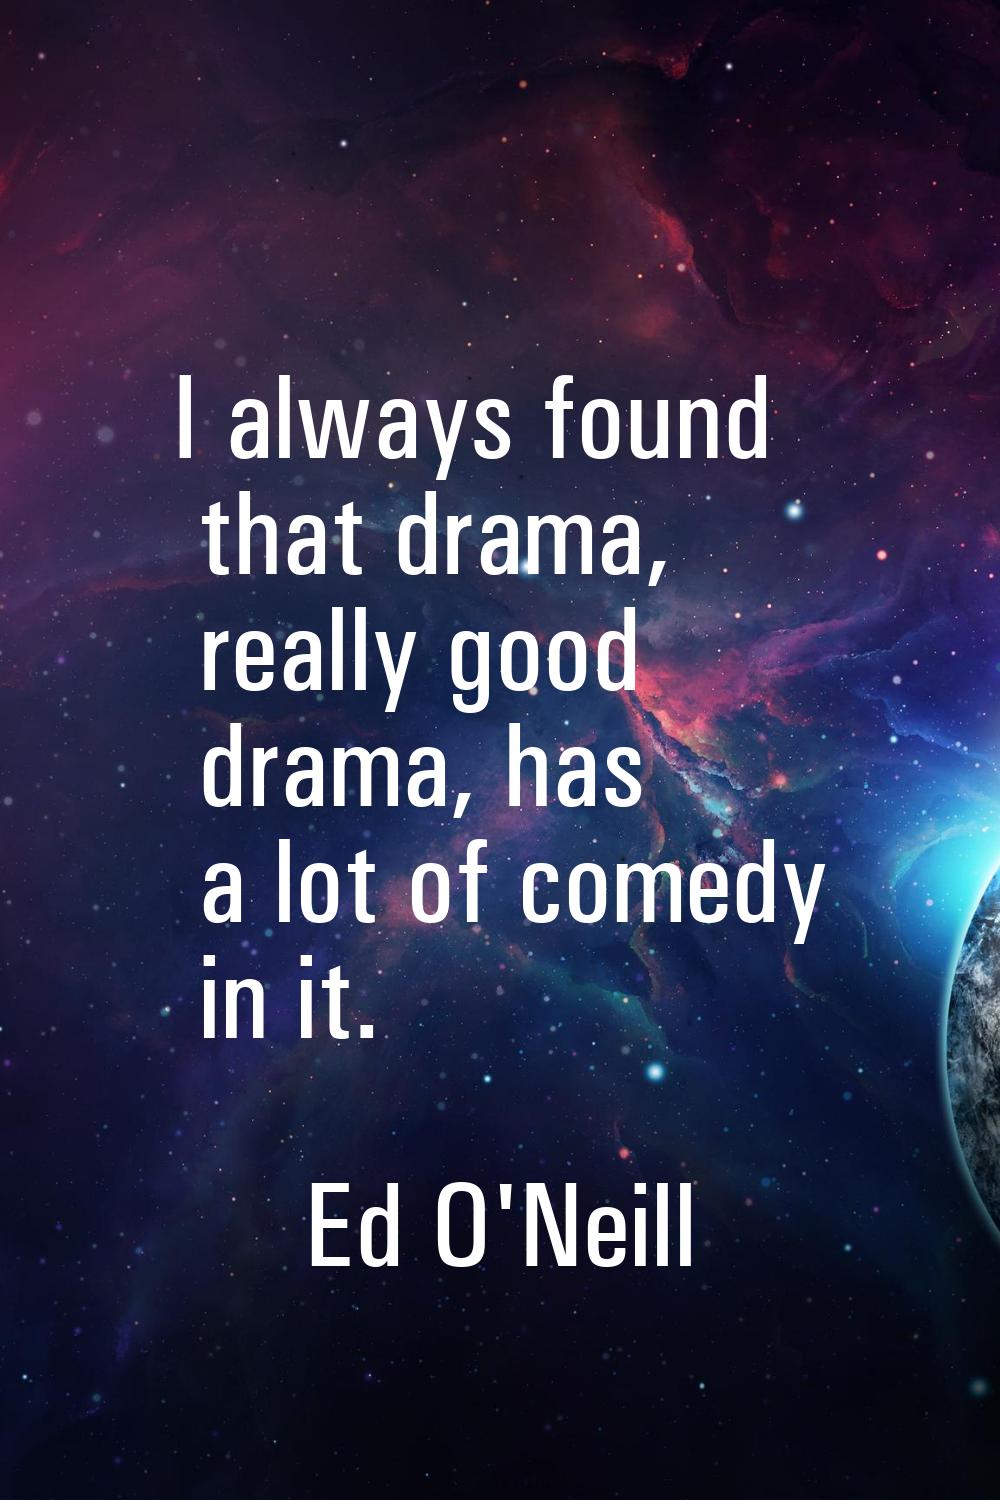 I always found that drama, really good drama, has a lot of comedy in it.